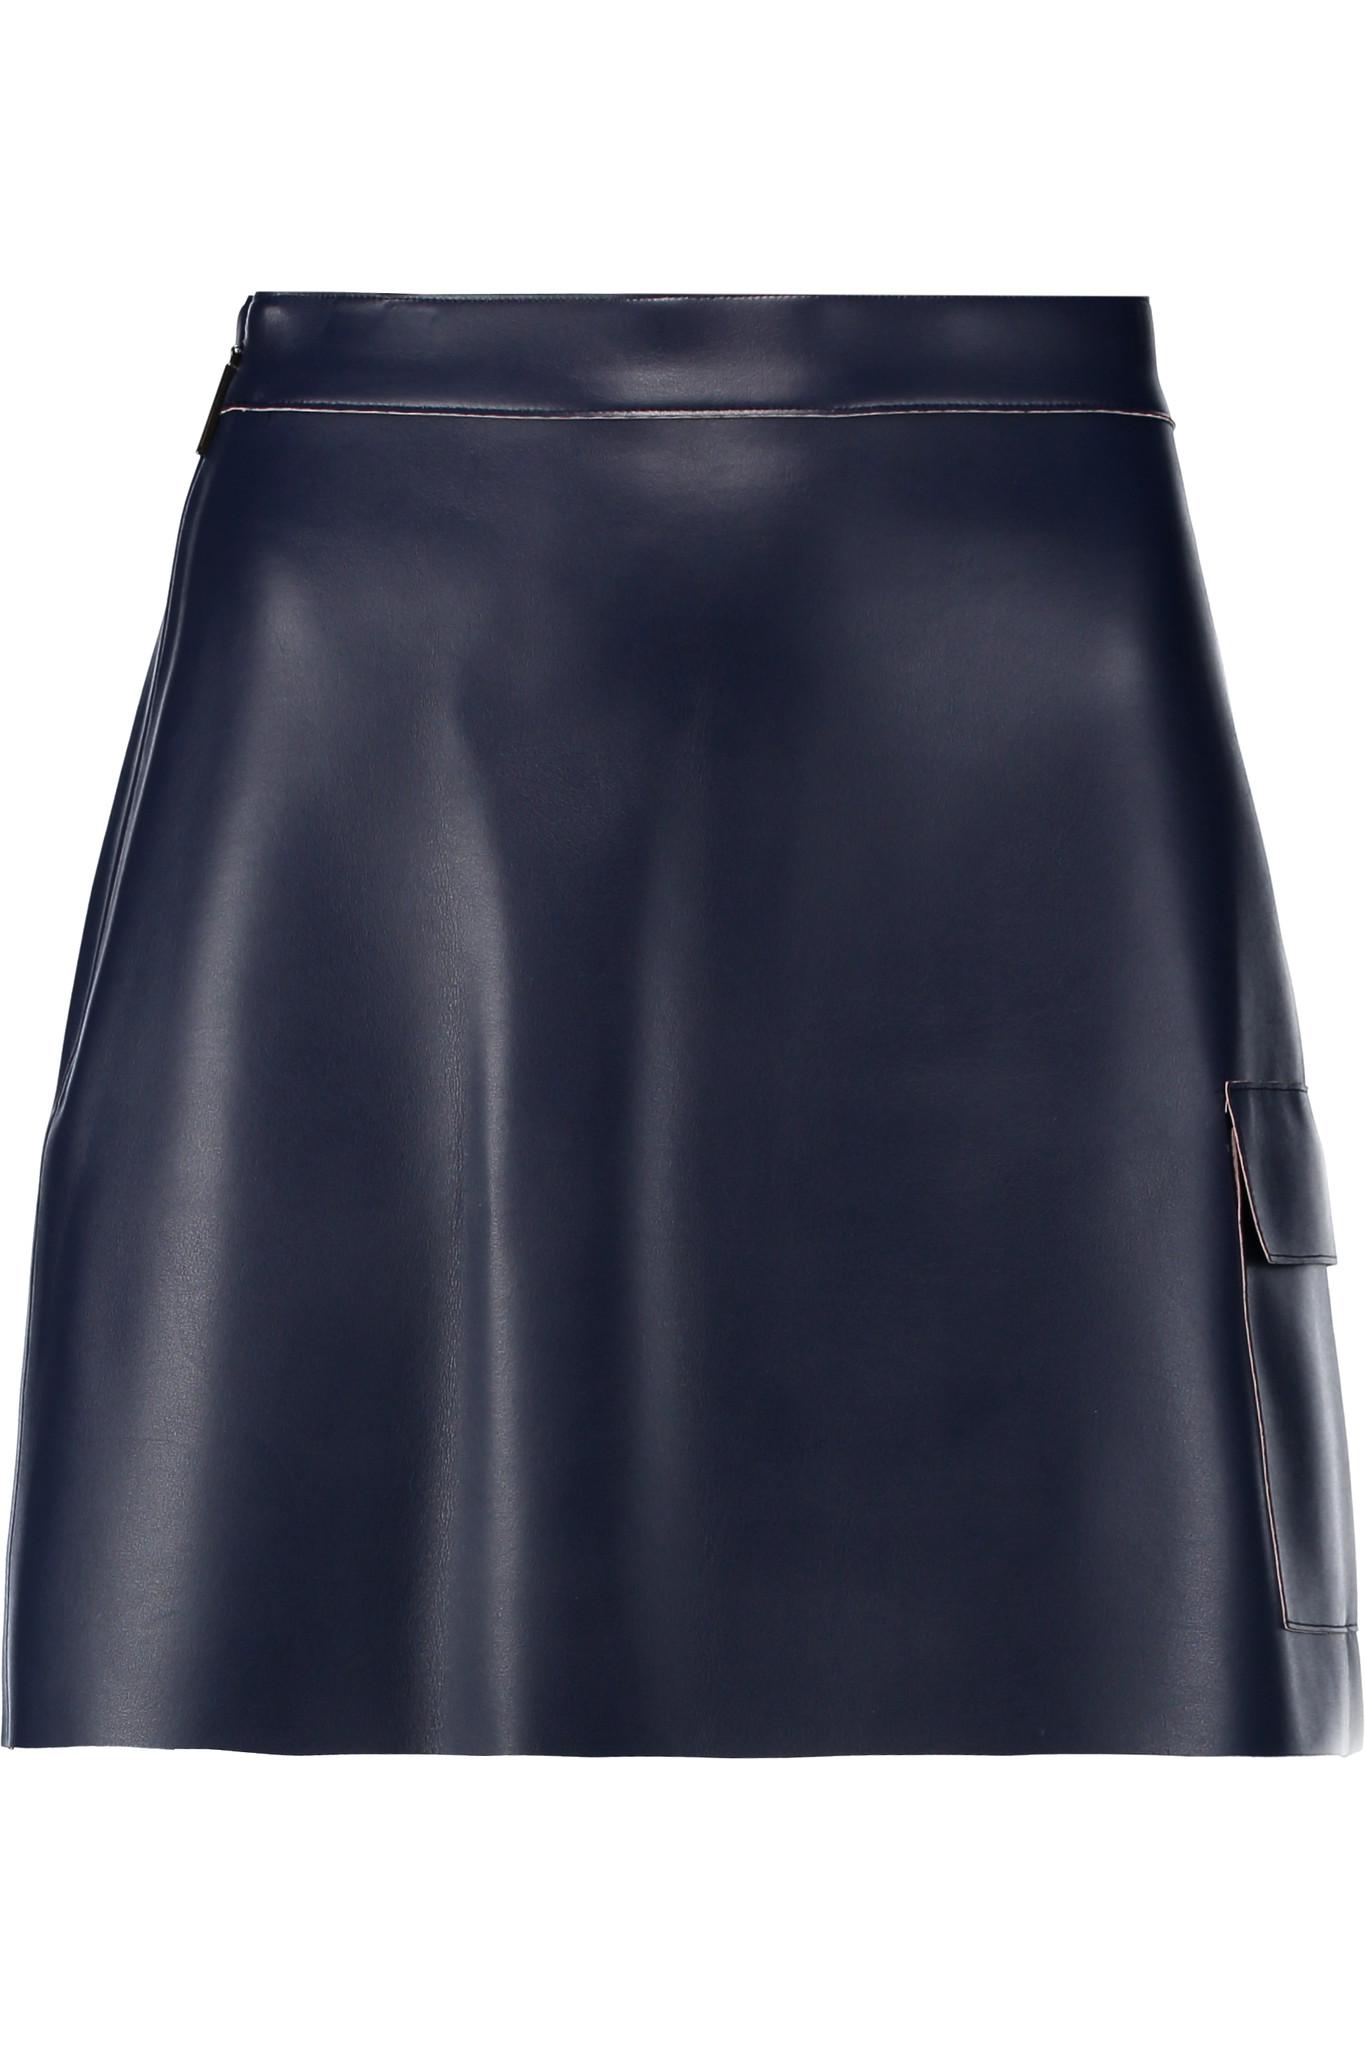 Lyst - Msgm Faux-Leather Mini Skirt in Blue